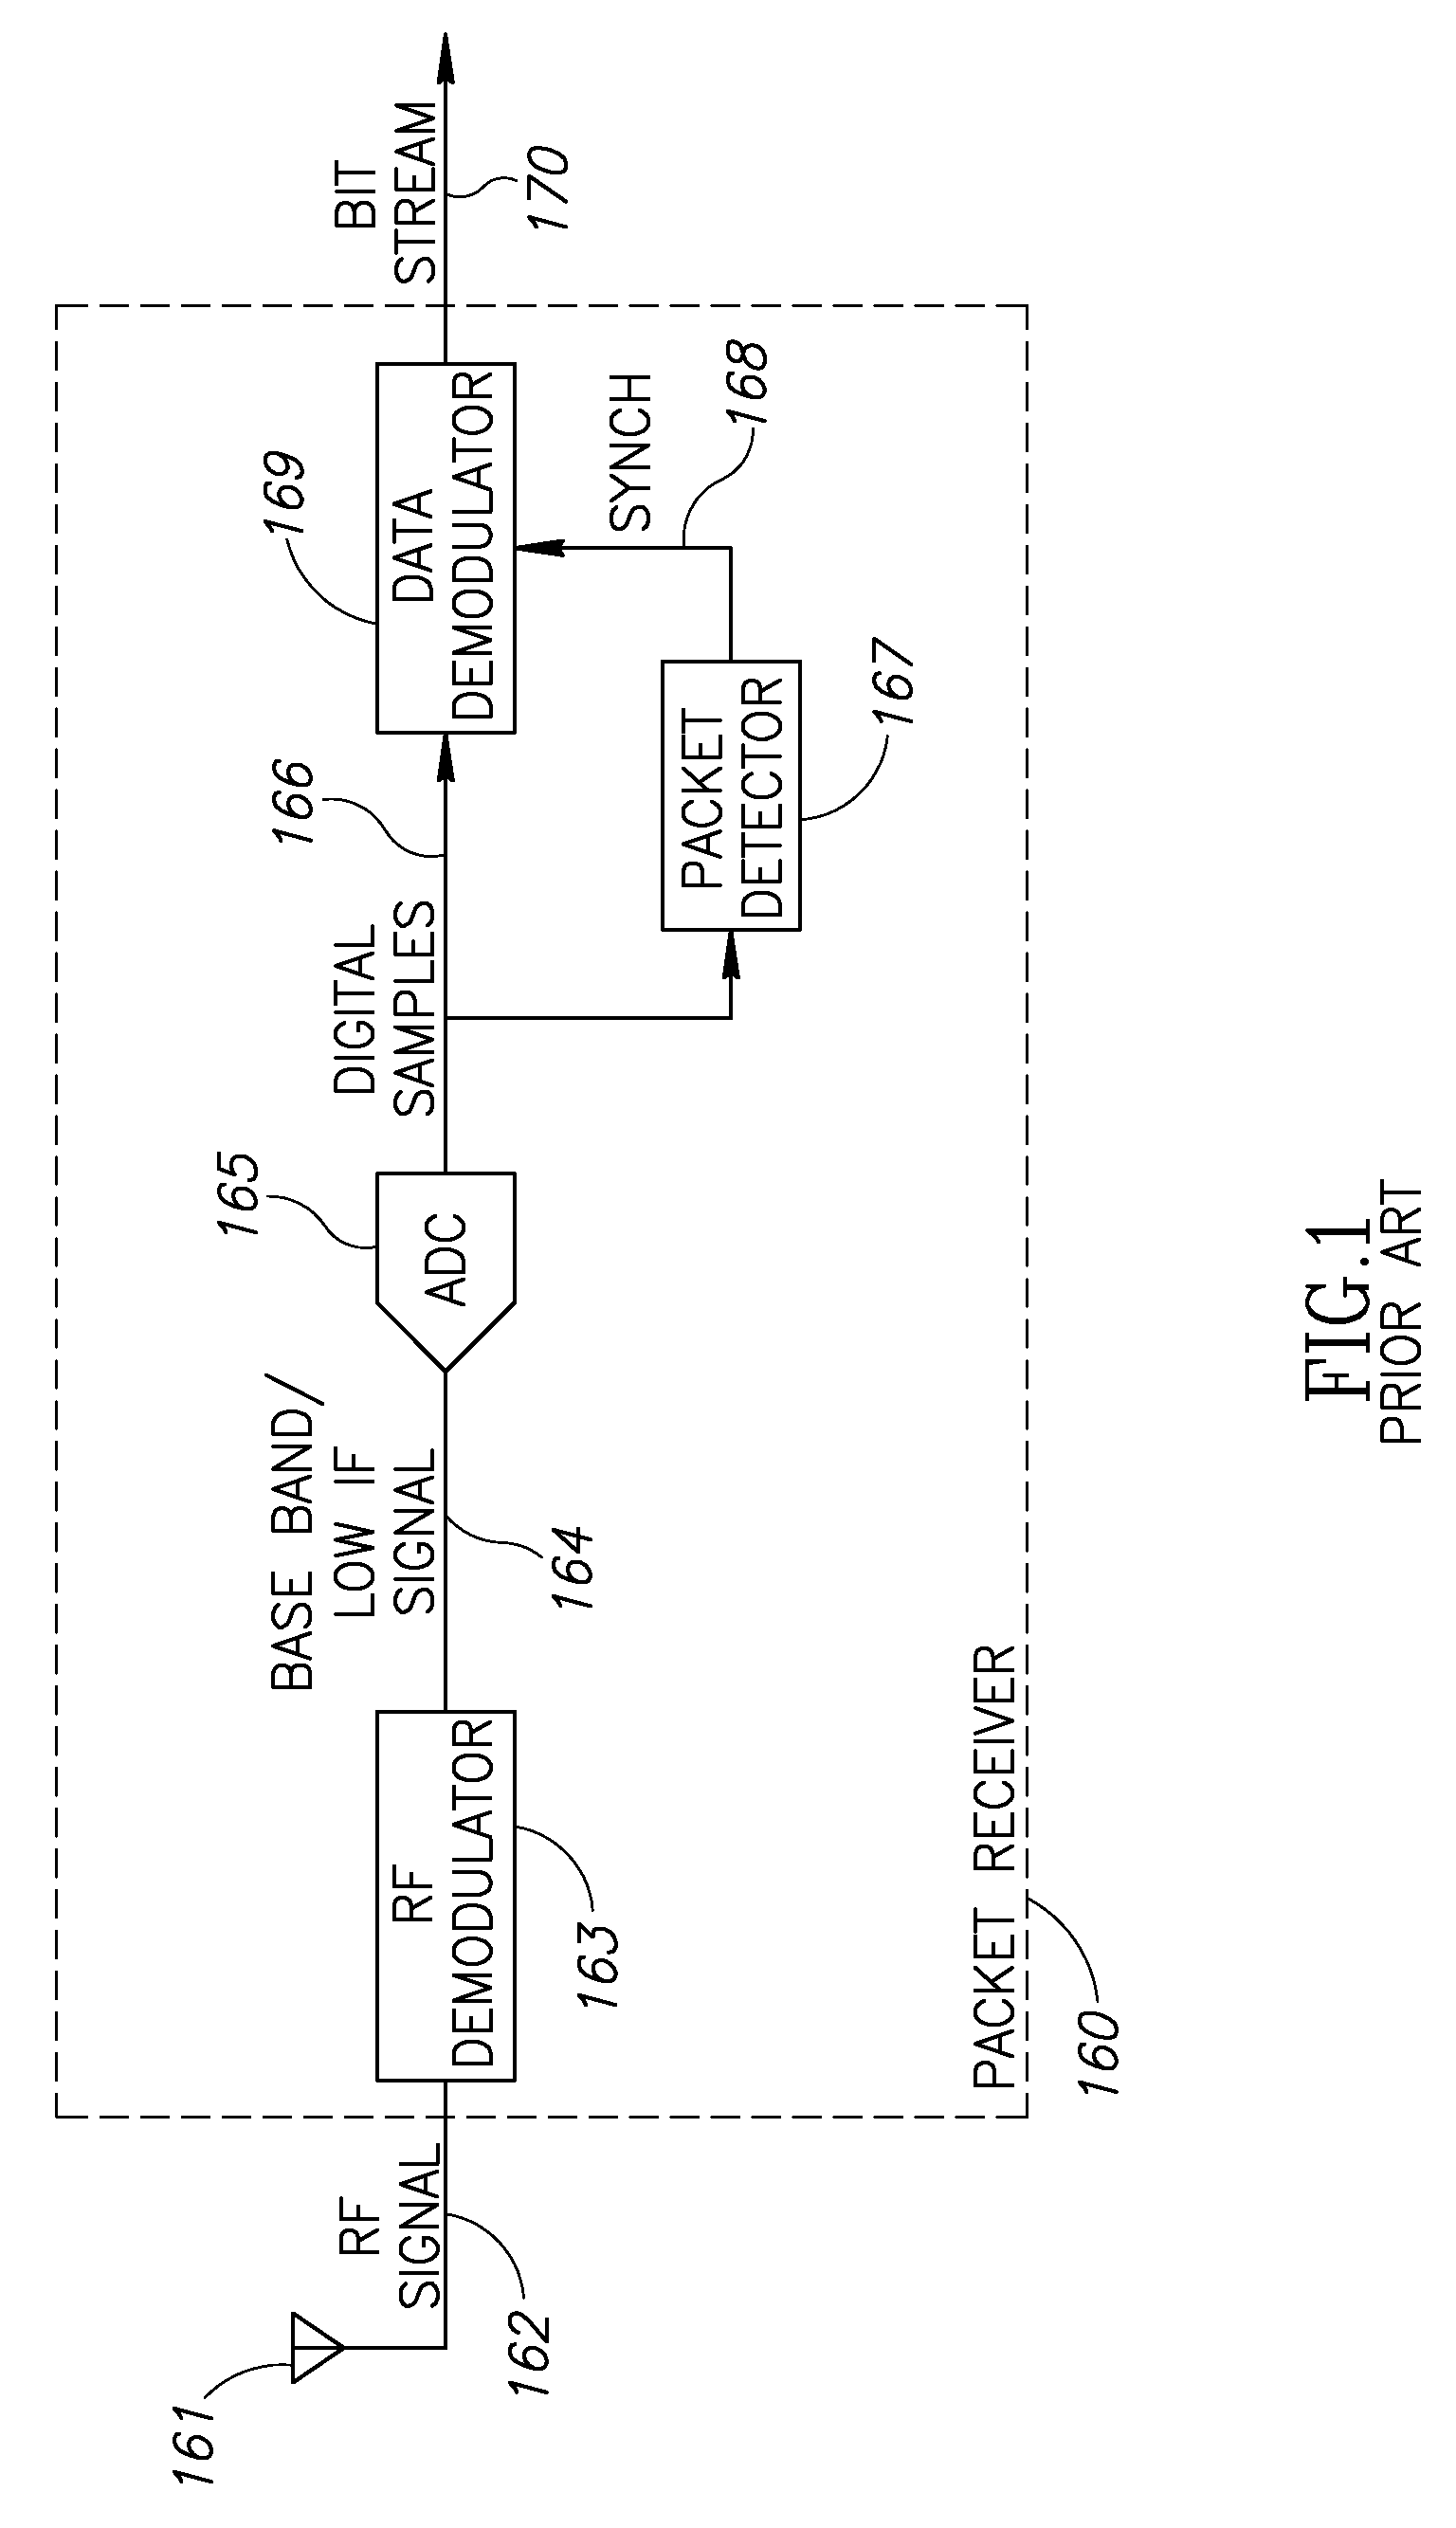 Apparatus for and method of robust packet detection and frequency offset estimation